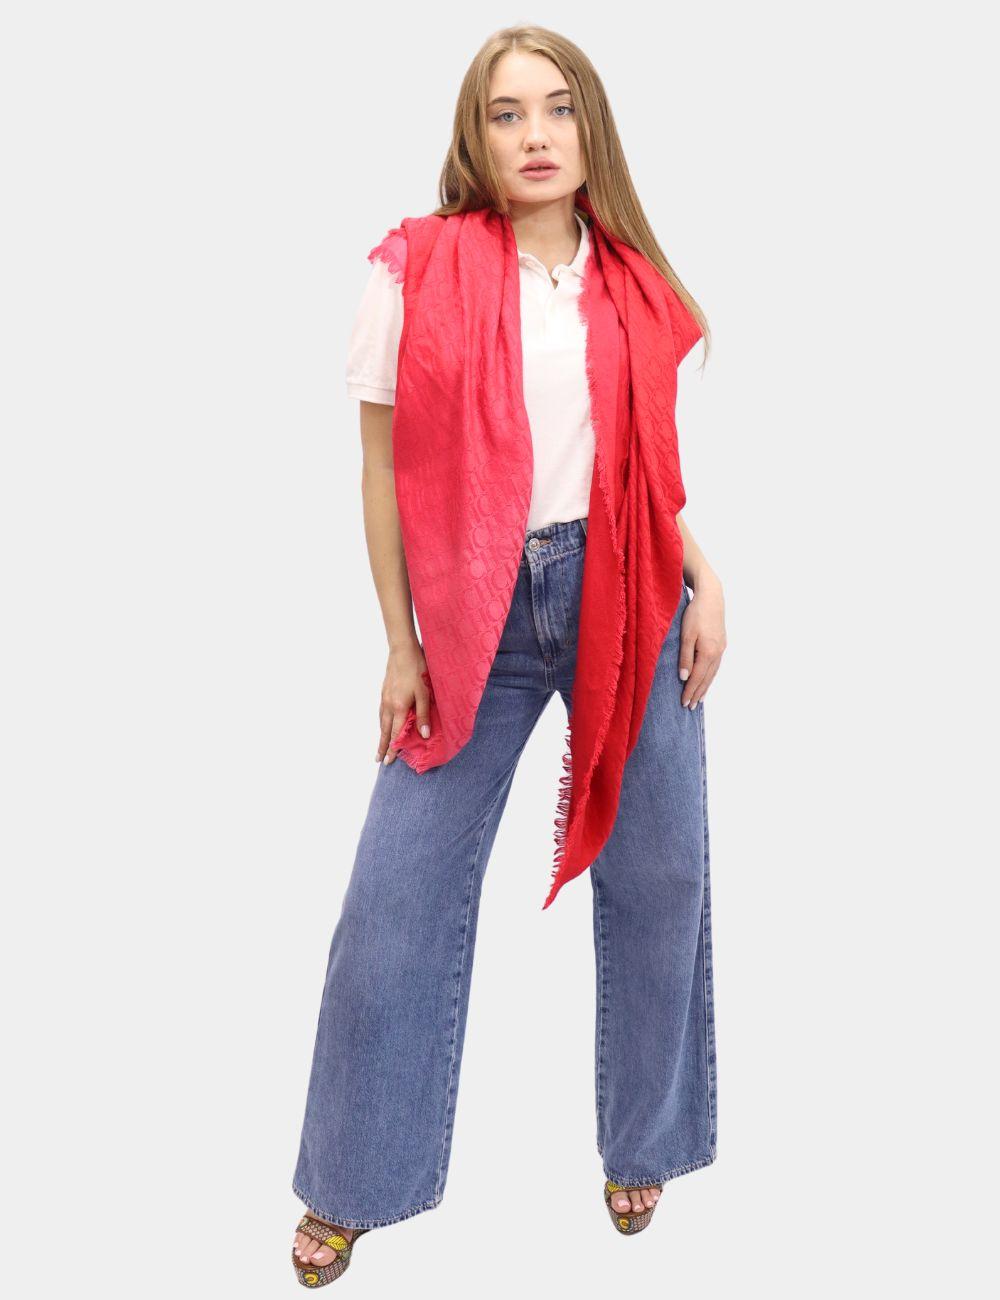 Carolina Herrera CH Initials 140 shawl in Ombre Red. 
-Square shawl in silk and wool-blend with Carolina's initials in jacquard and frayed trims.

Material: Silk and wool-blend
Measurements: 140 x 140 cm
Overall Condition: Good